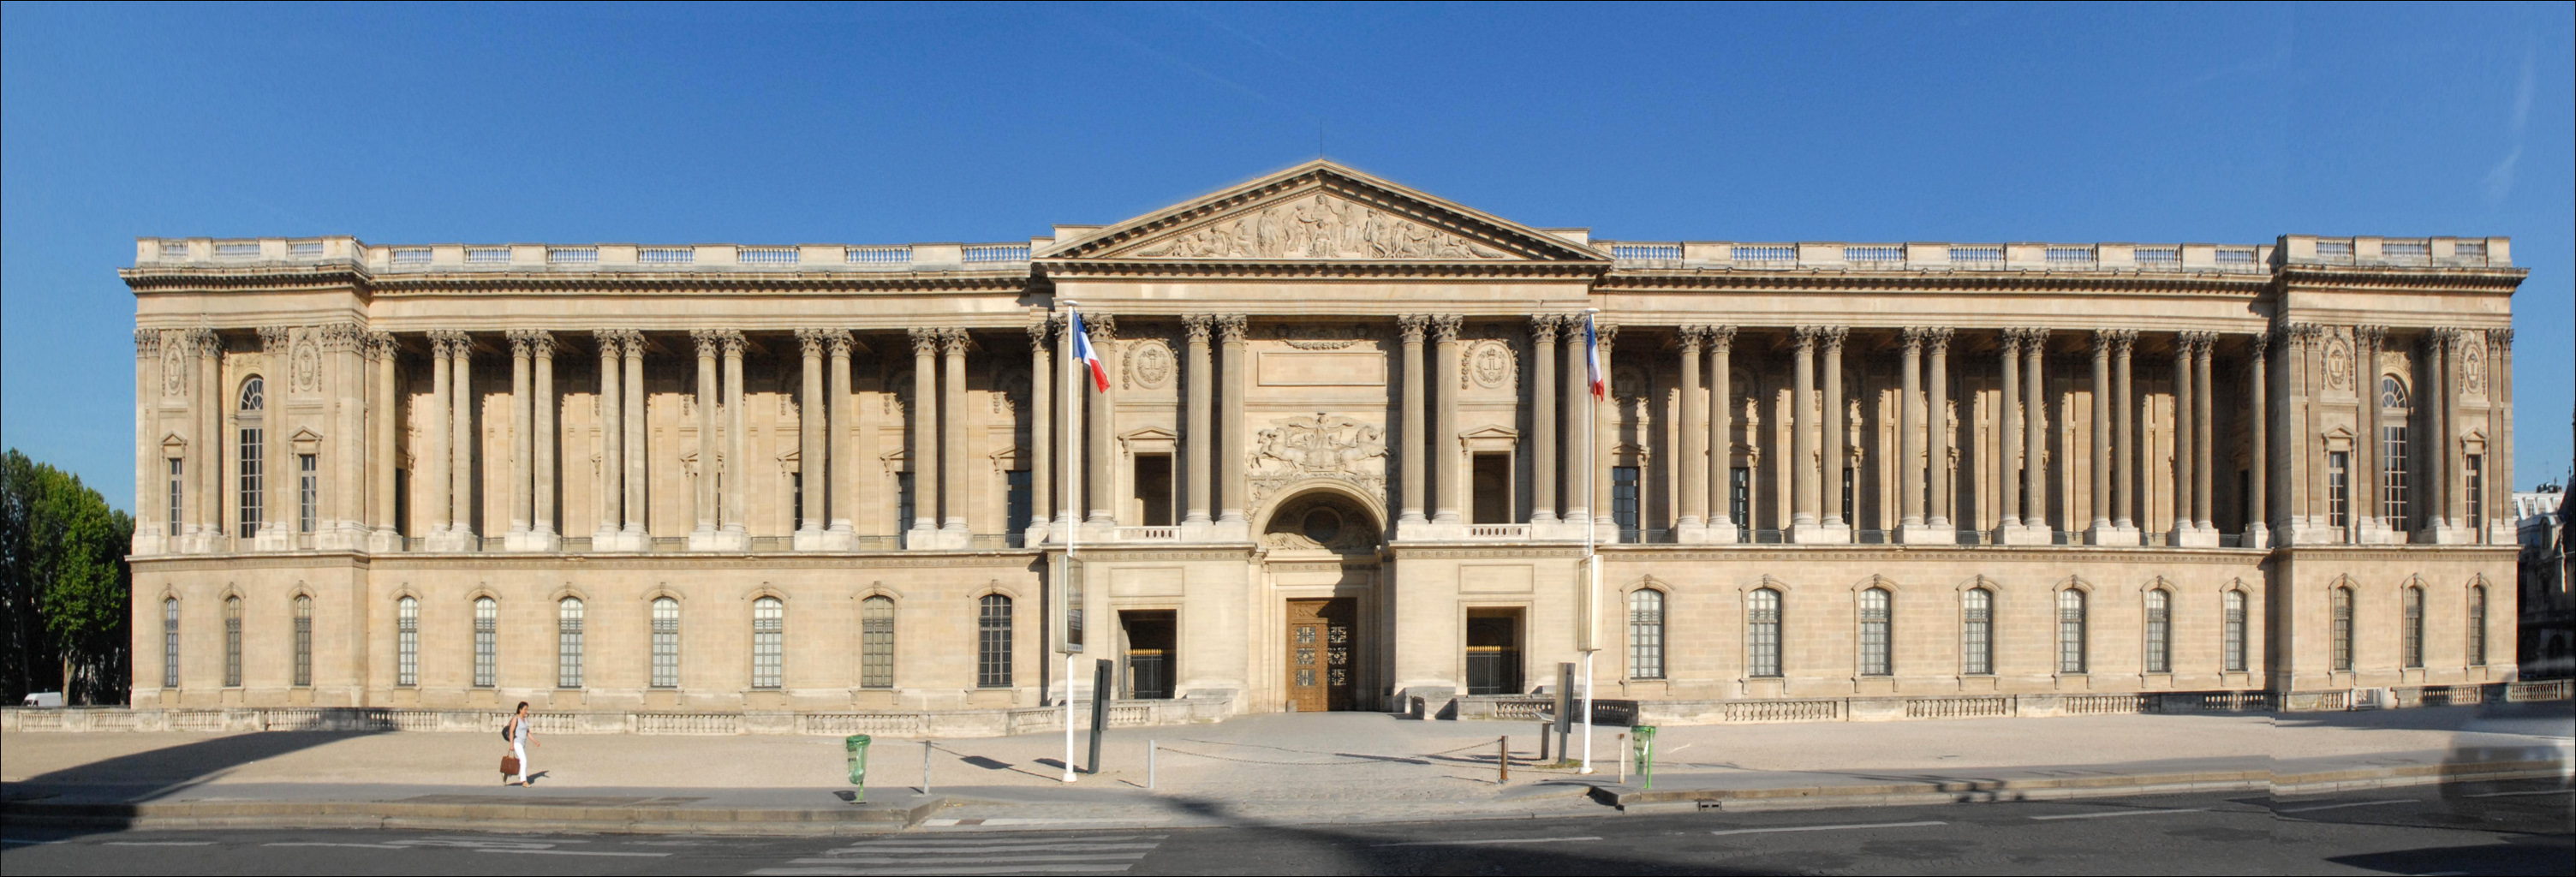 east front of the Louvre